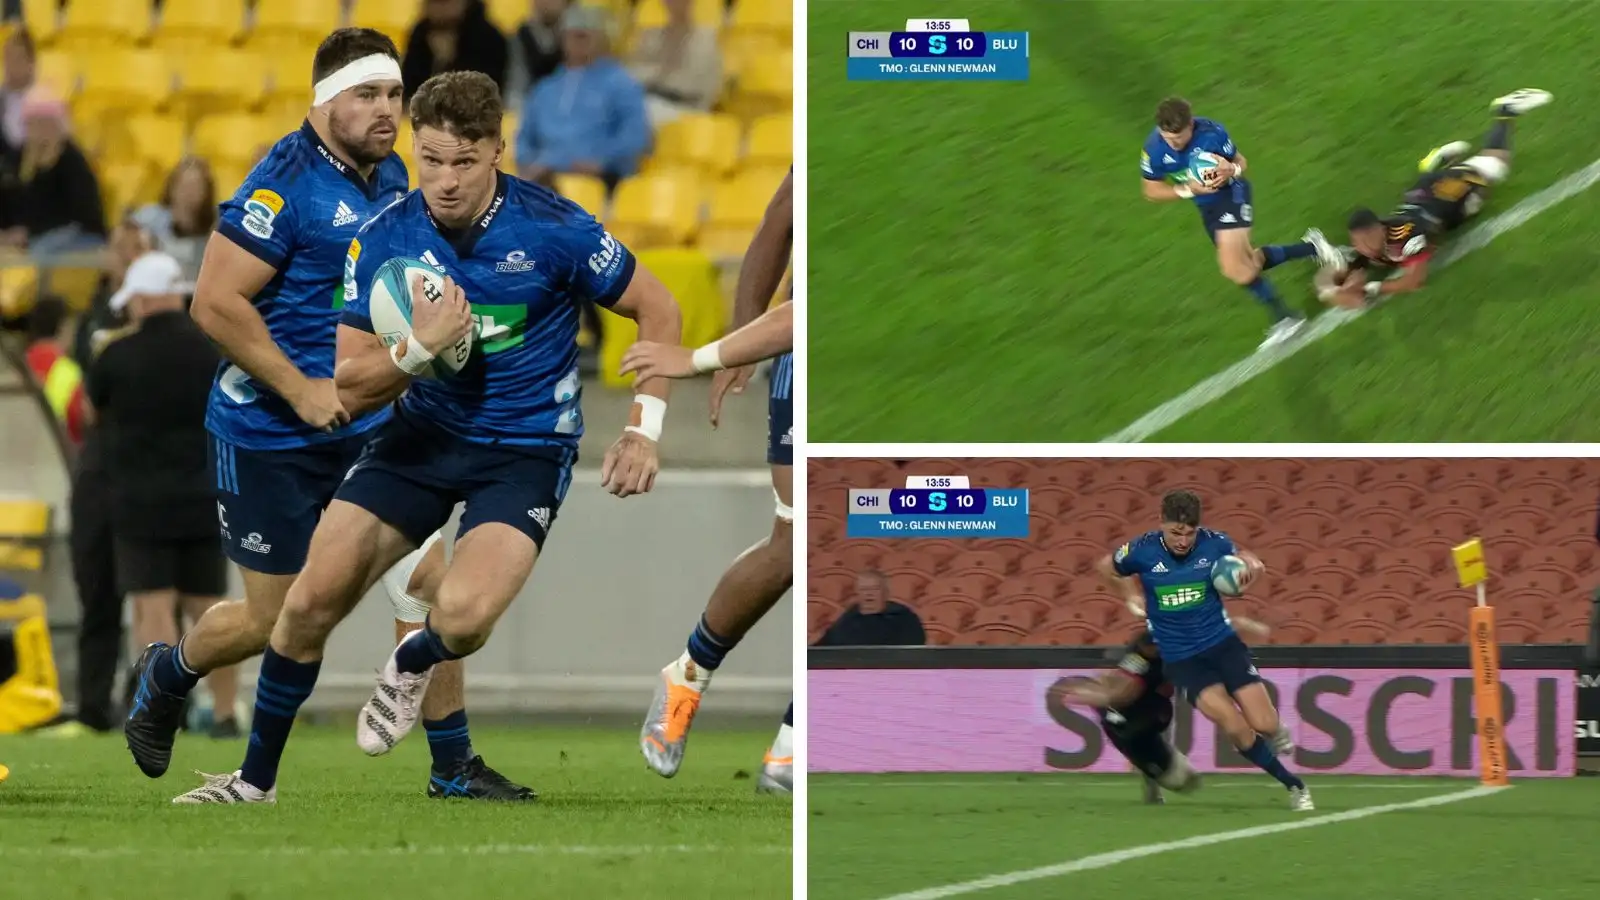 WATCH: ‘Uncharacteristic’ error from Beauden Barrett as he bombs a try in Blues’ Super Rugby Pacific defeat to the Chiefs